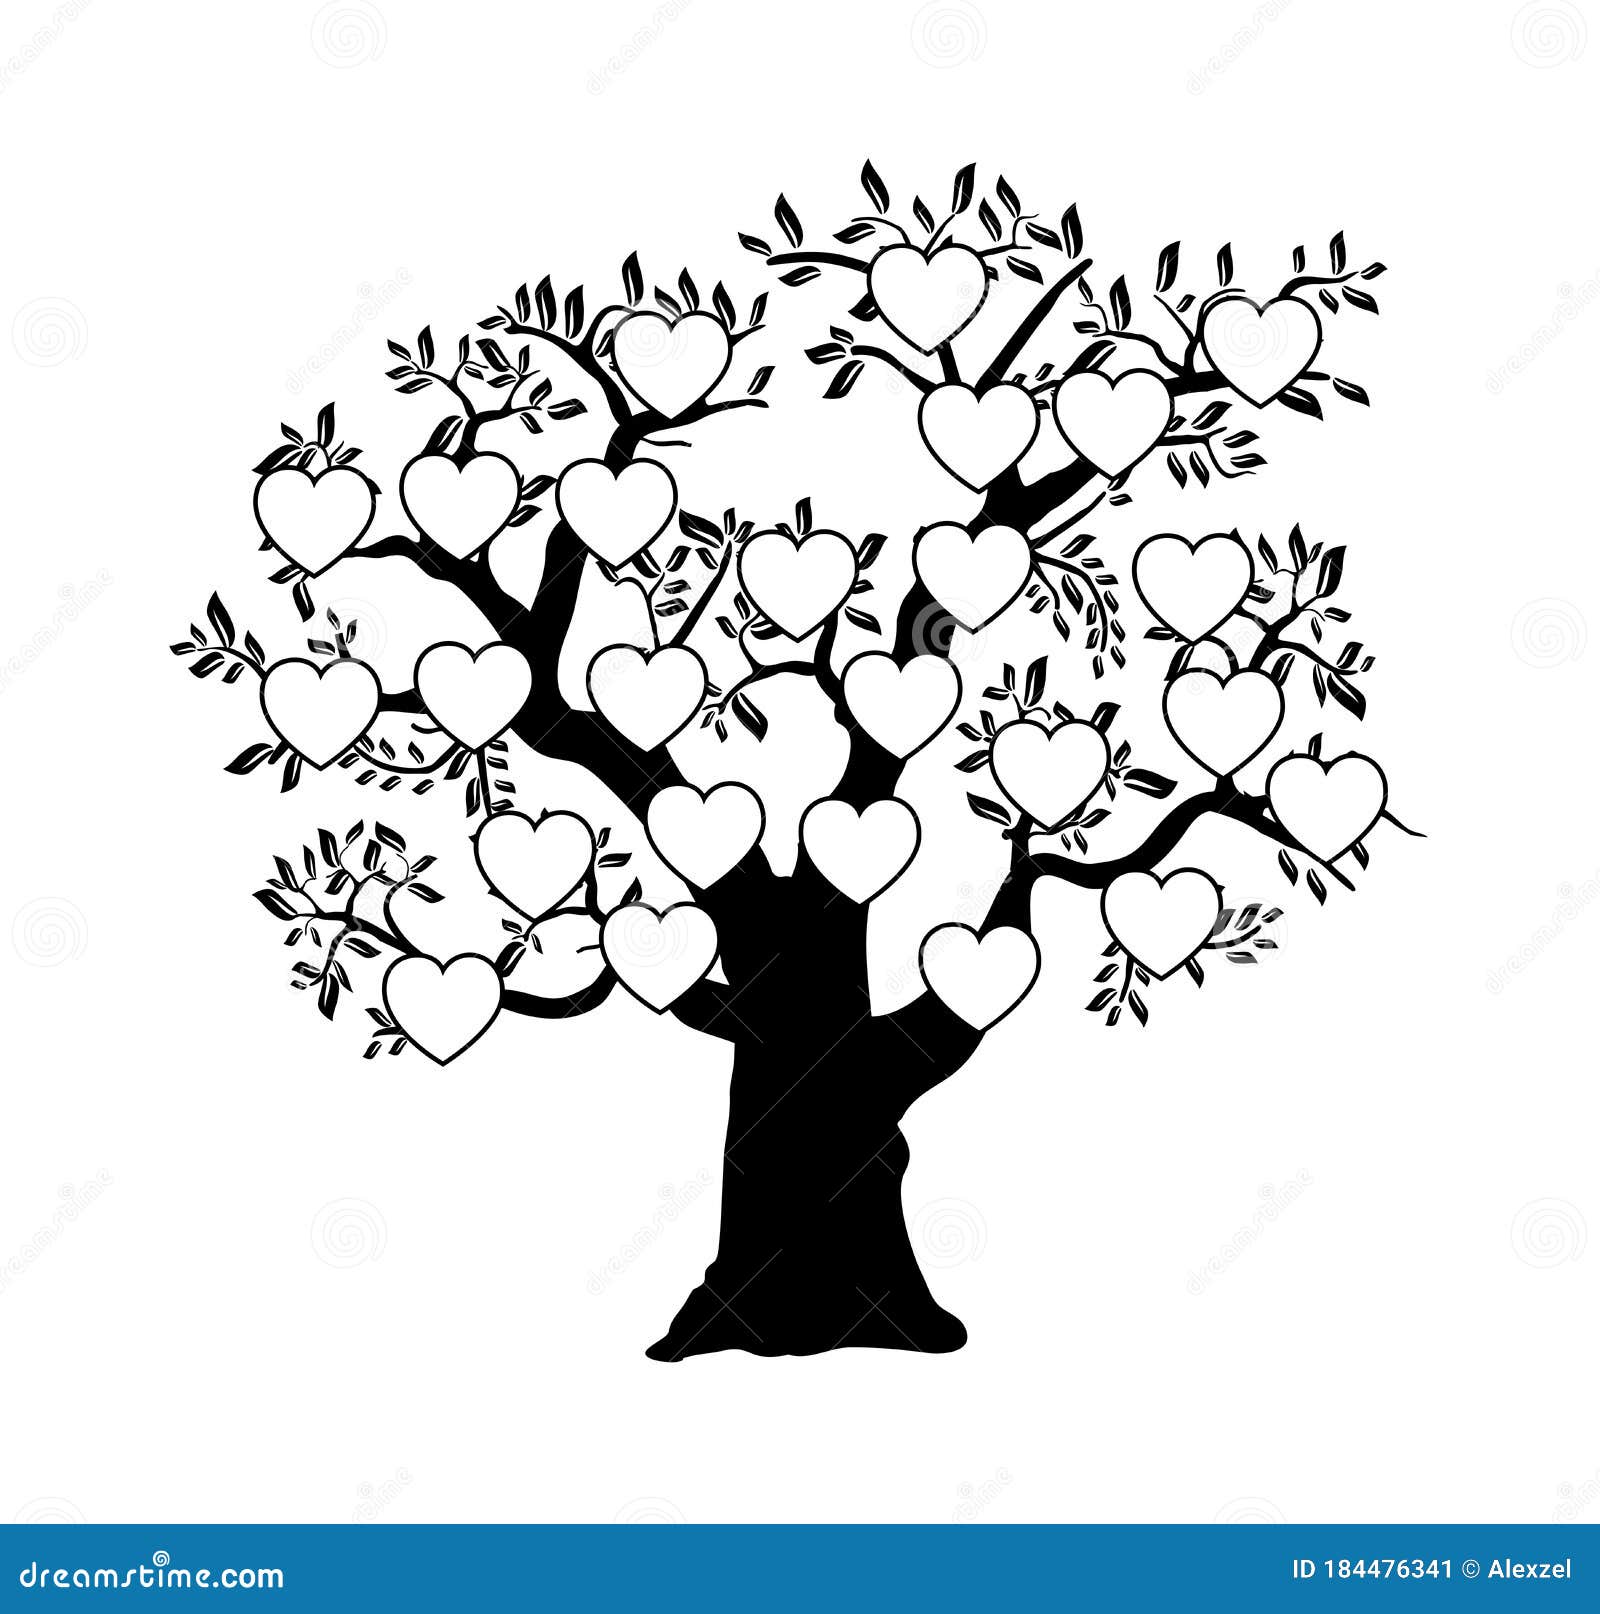 The Family  Tree  Genealogical Silhouette  Stock Vector Illustration of 